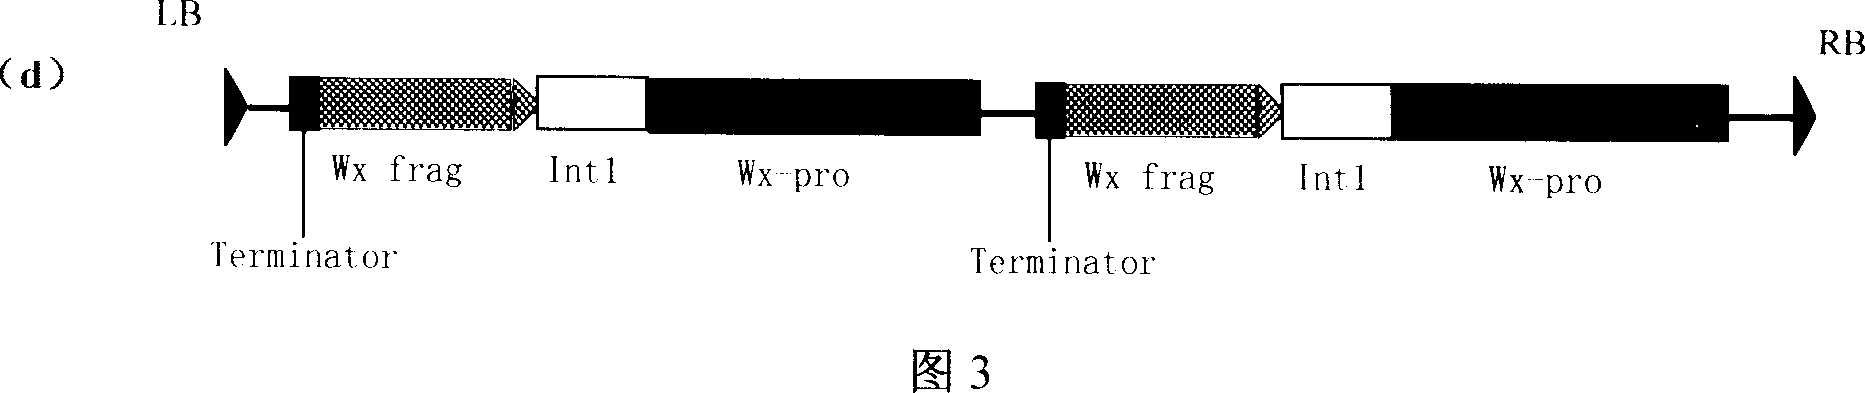 Expression vector of duplicate inverted waxy gene, preparation method, and application